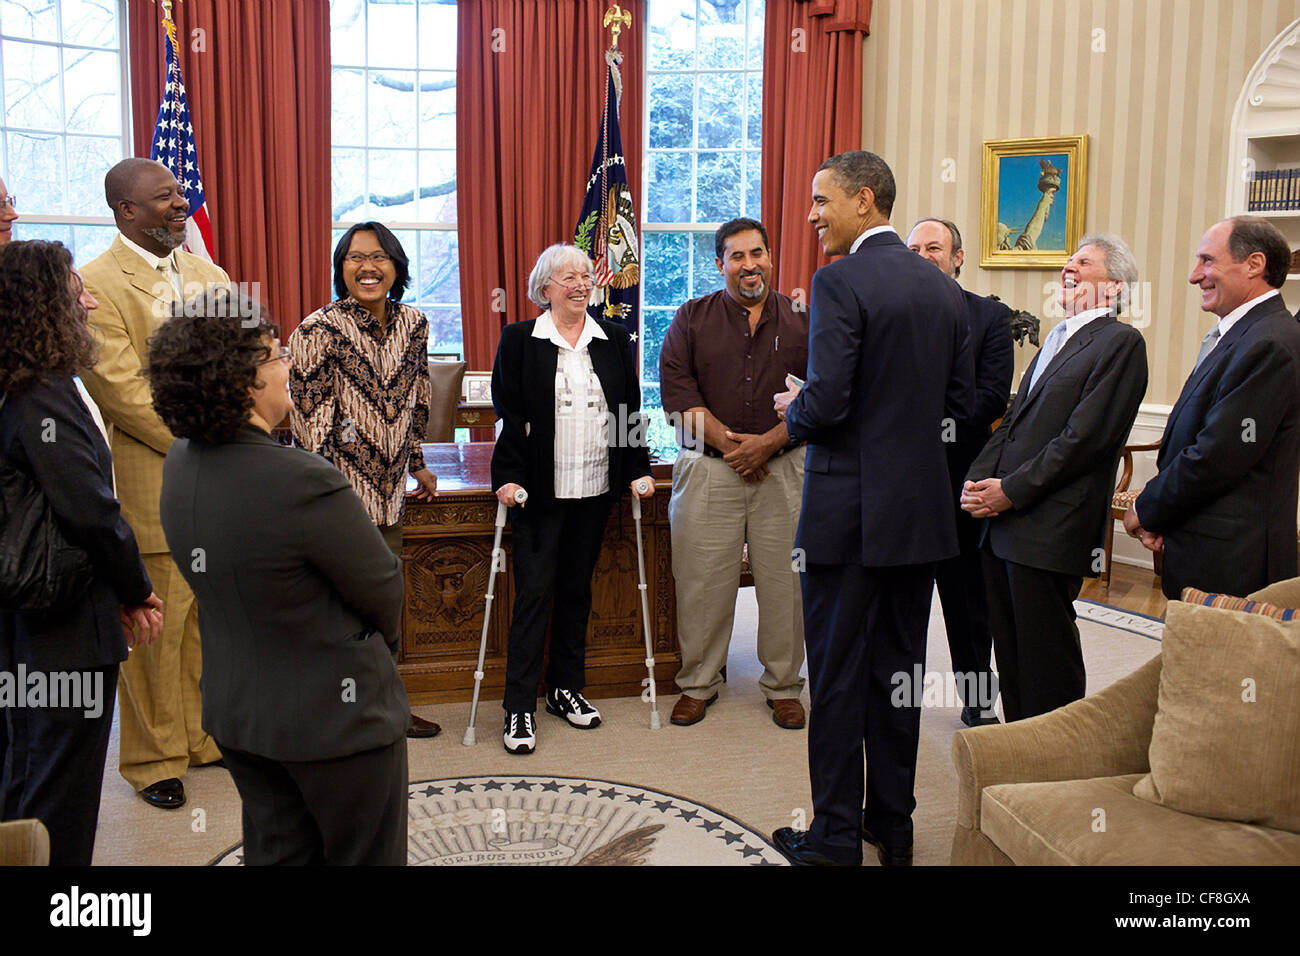 President Barack Obama meets with Goldman Environmental Prize winners in the Oval Office April 13, 2011 in Washington, DC. The Goldman Environmental Prize is a prize awarded annually to grassroots environmental activists, one from each of the world's six geographic regions. Stock Photo